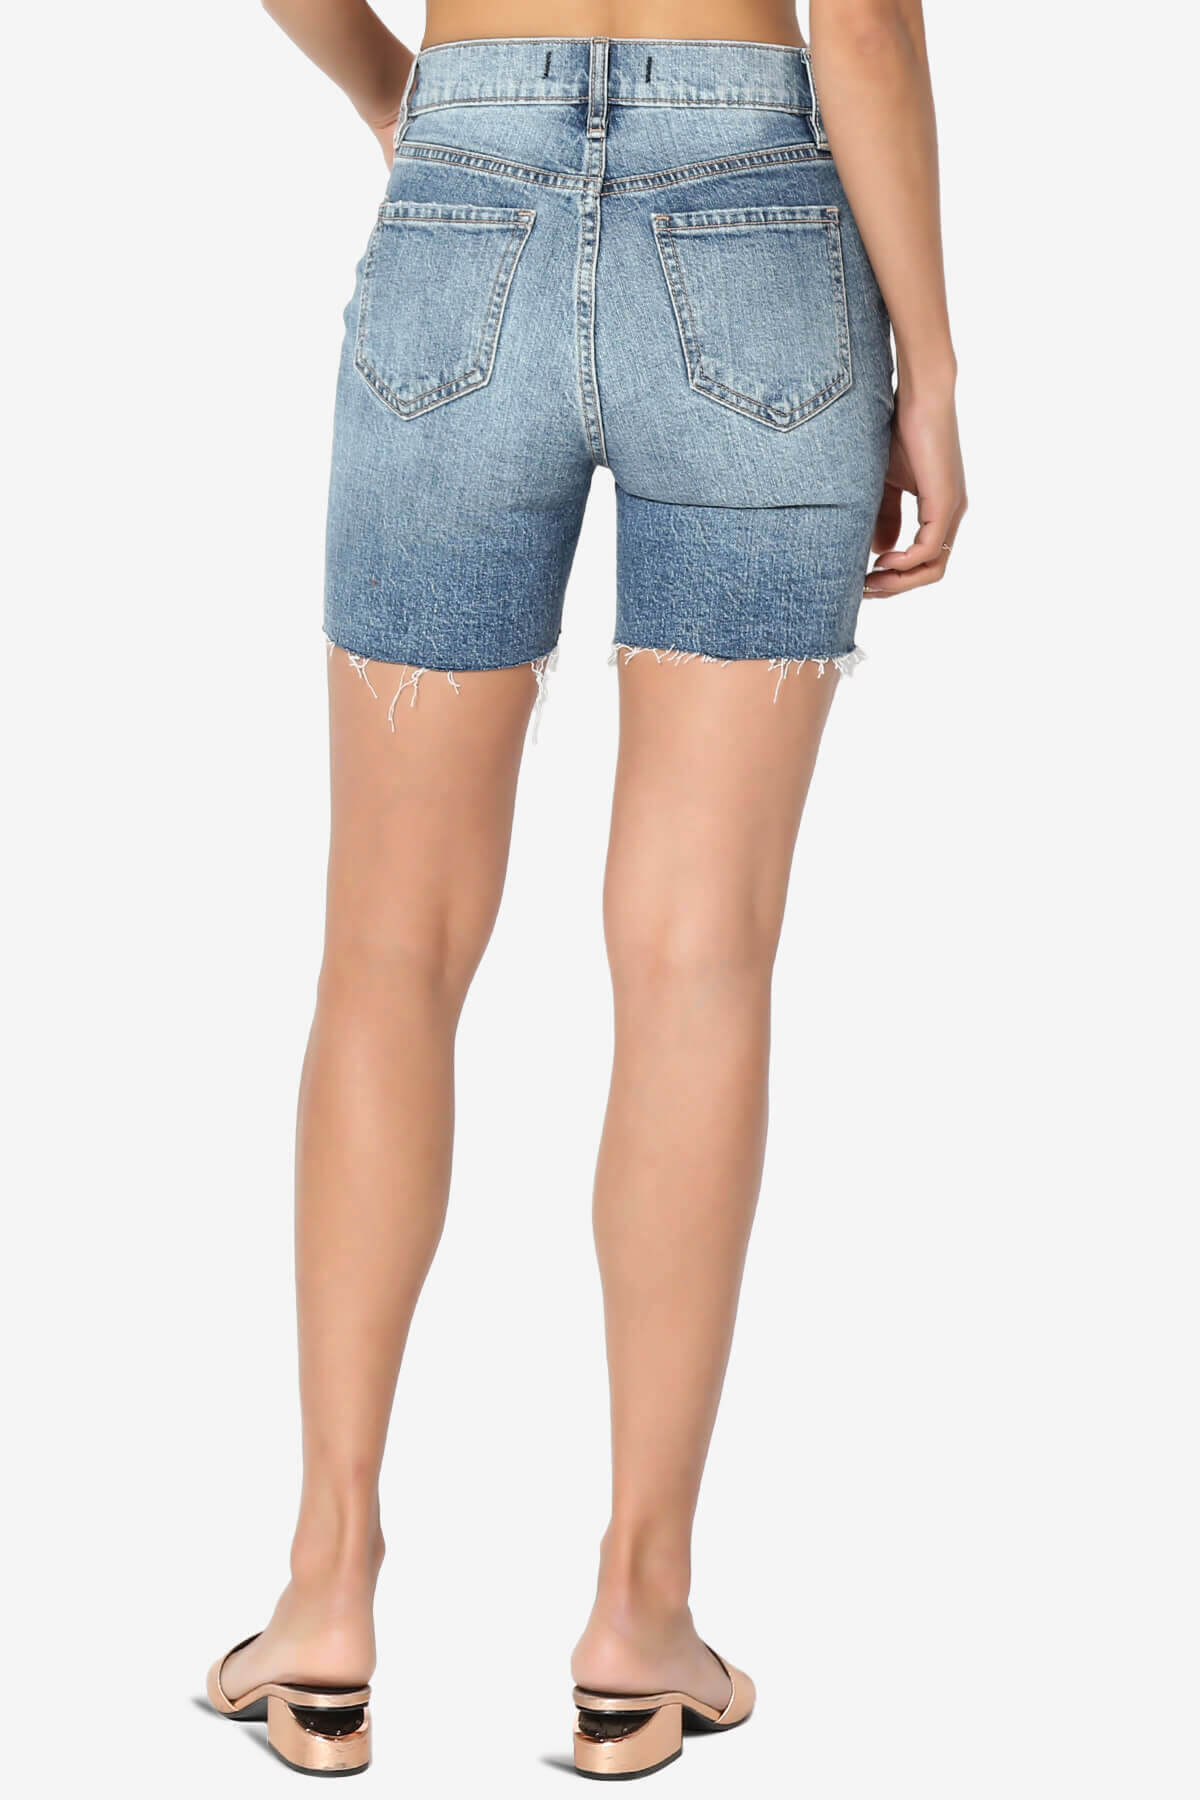 Kailey High Rise Mid Thigh Denim Shorts in MD